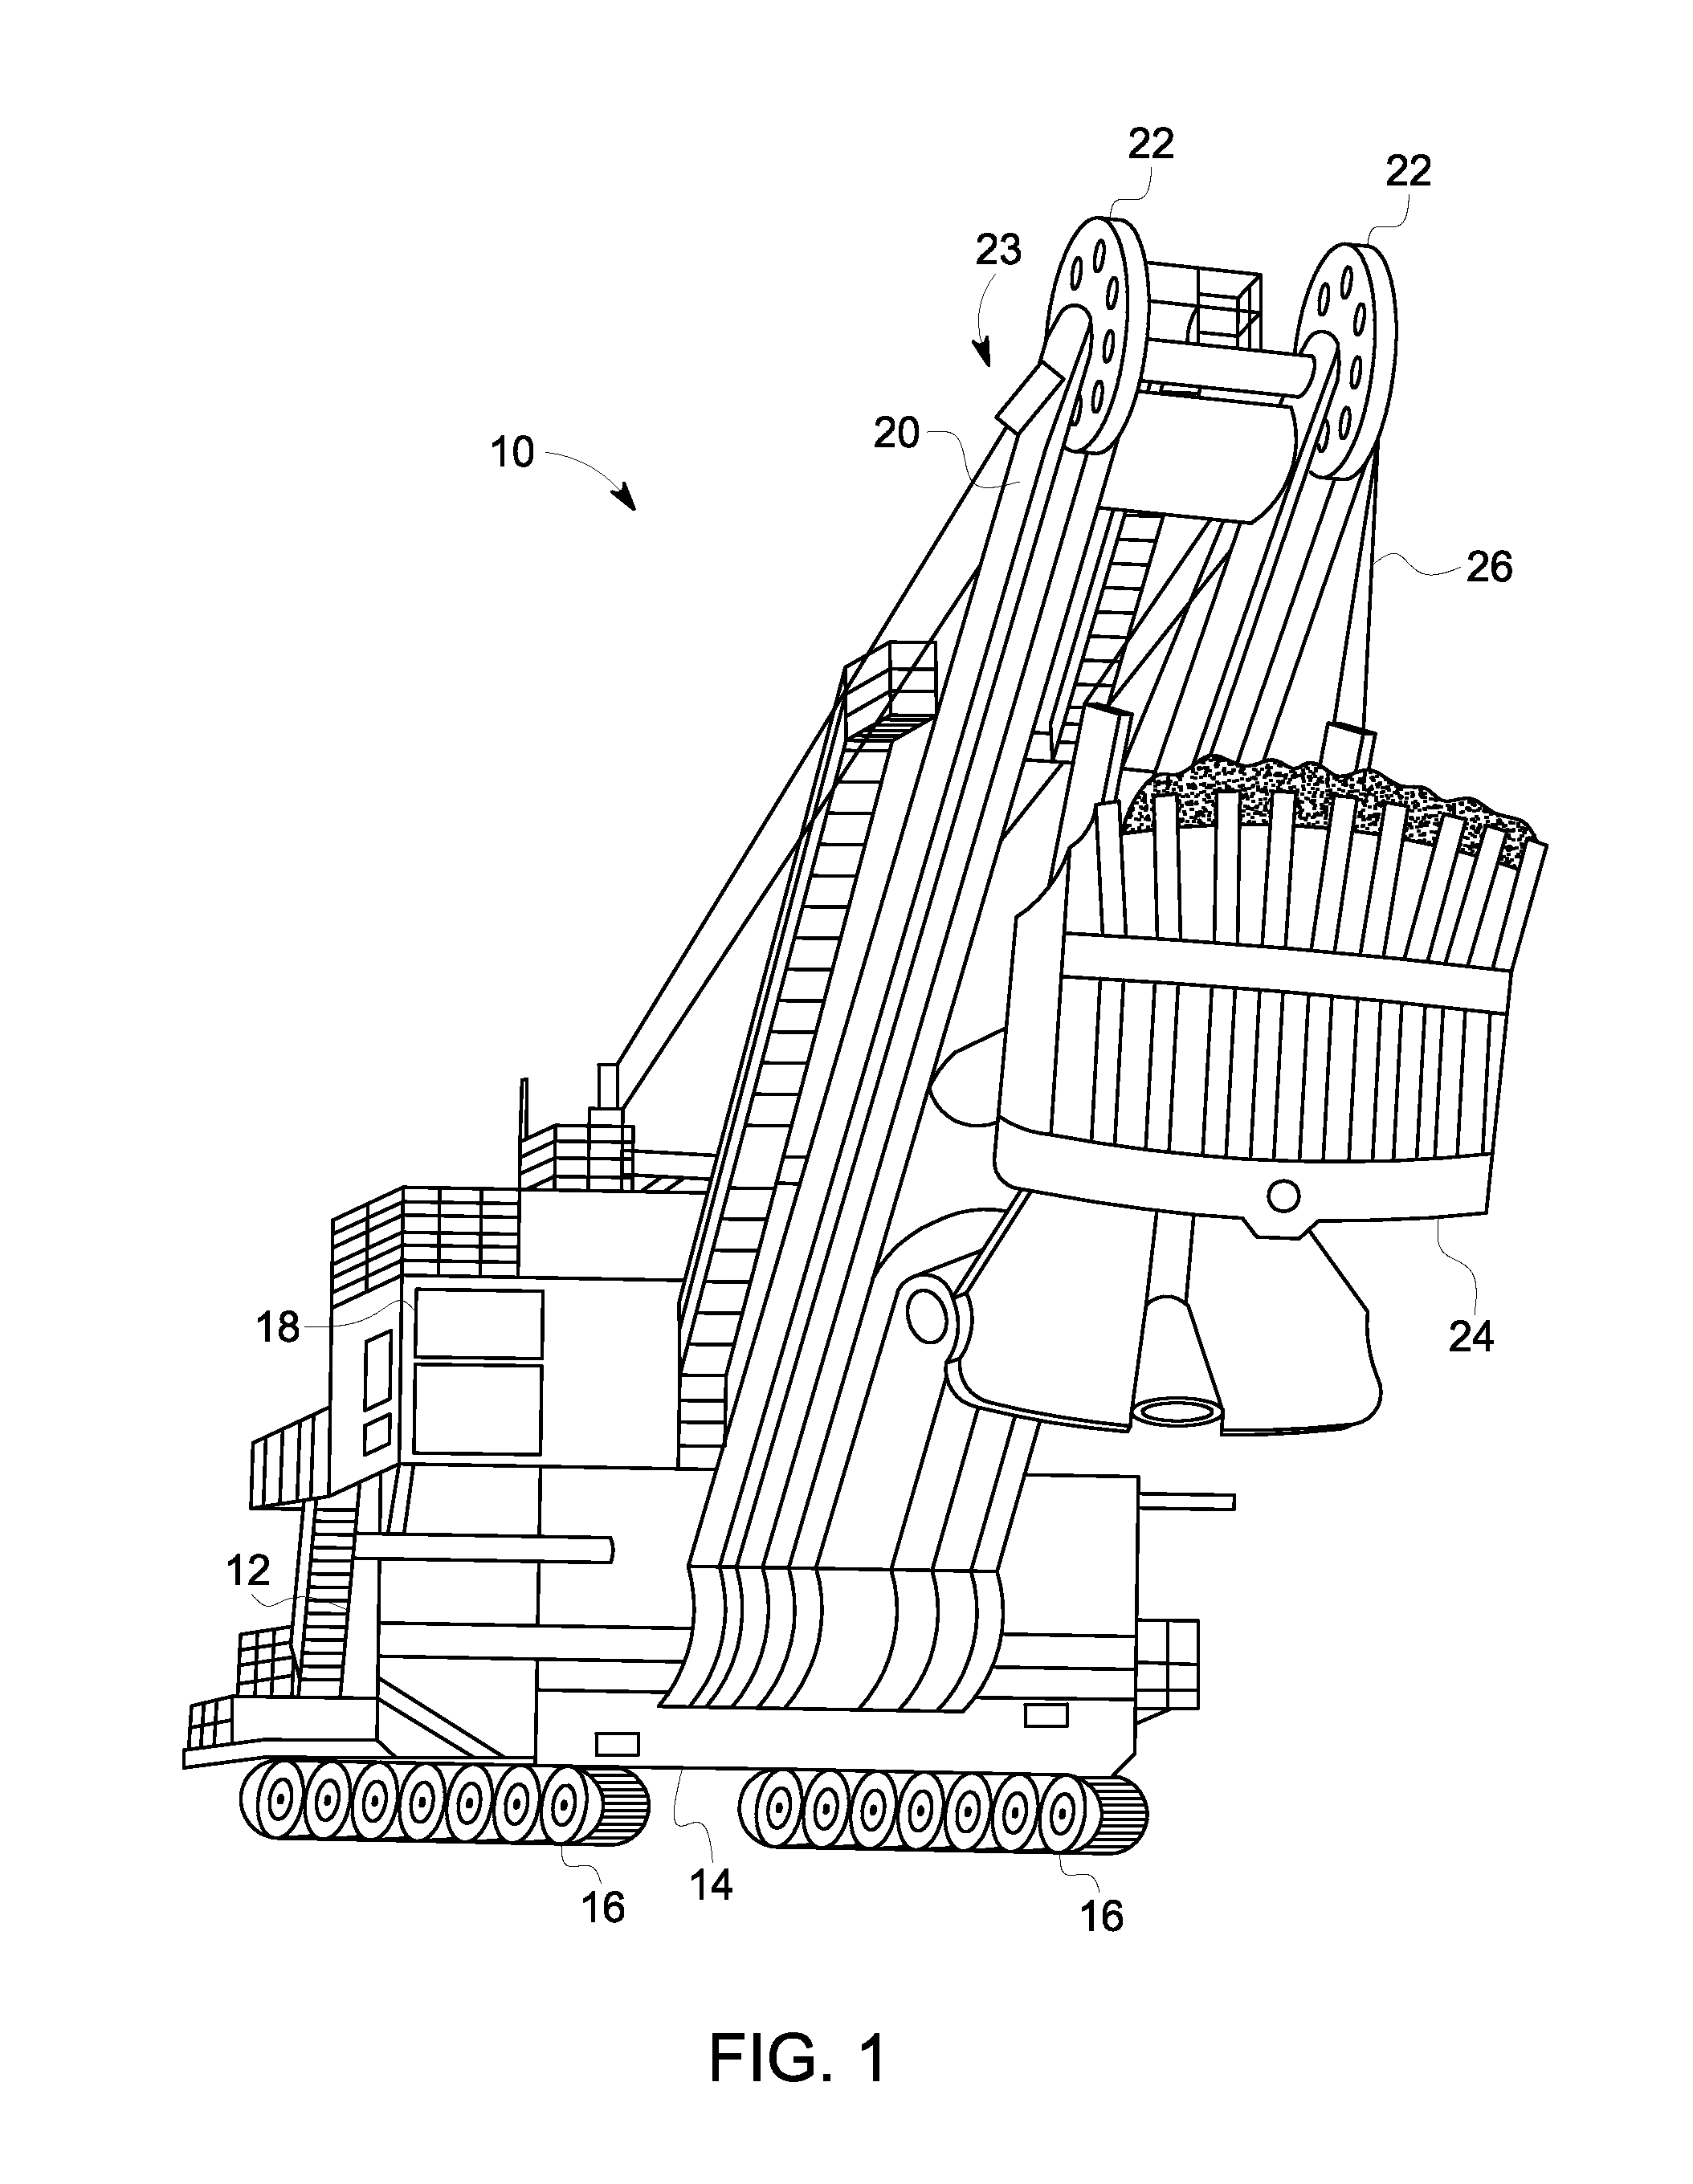 Method and system for detecting a damaged component of a machine